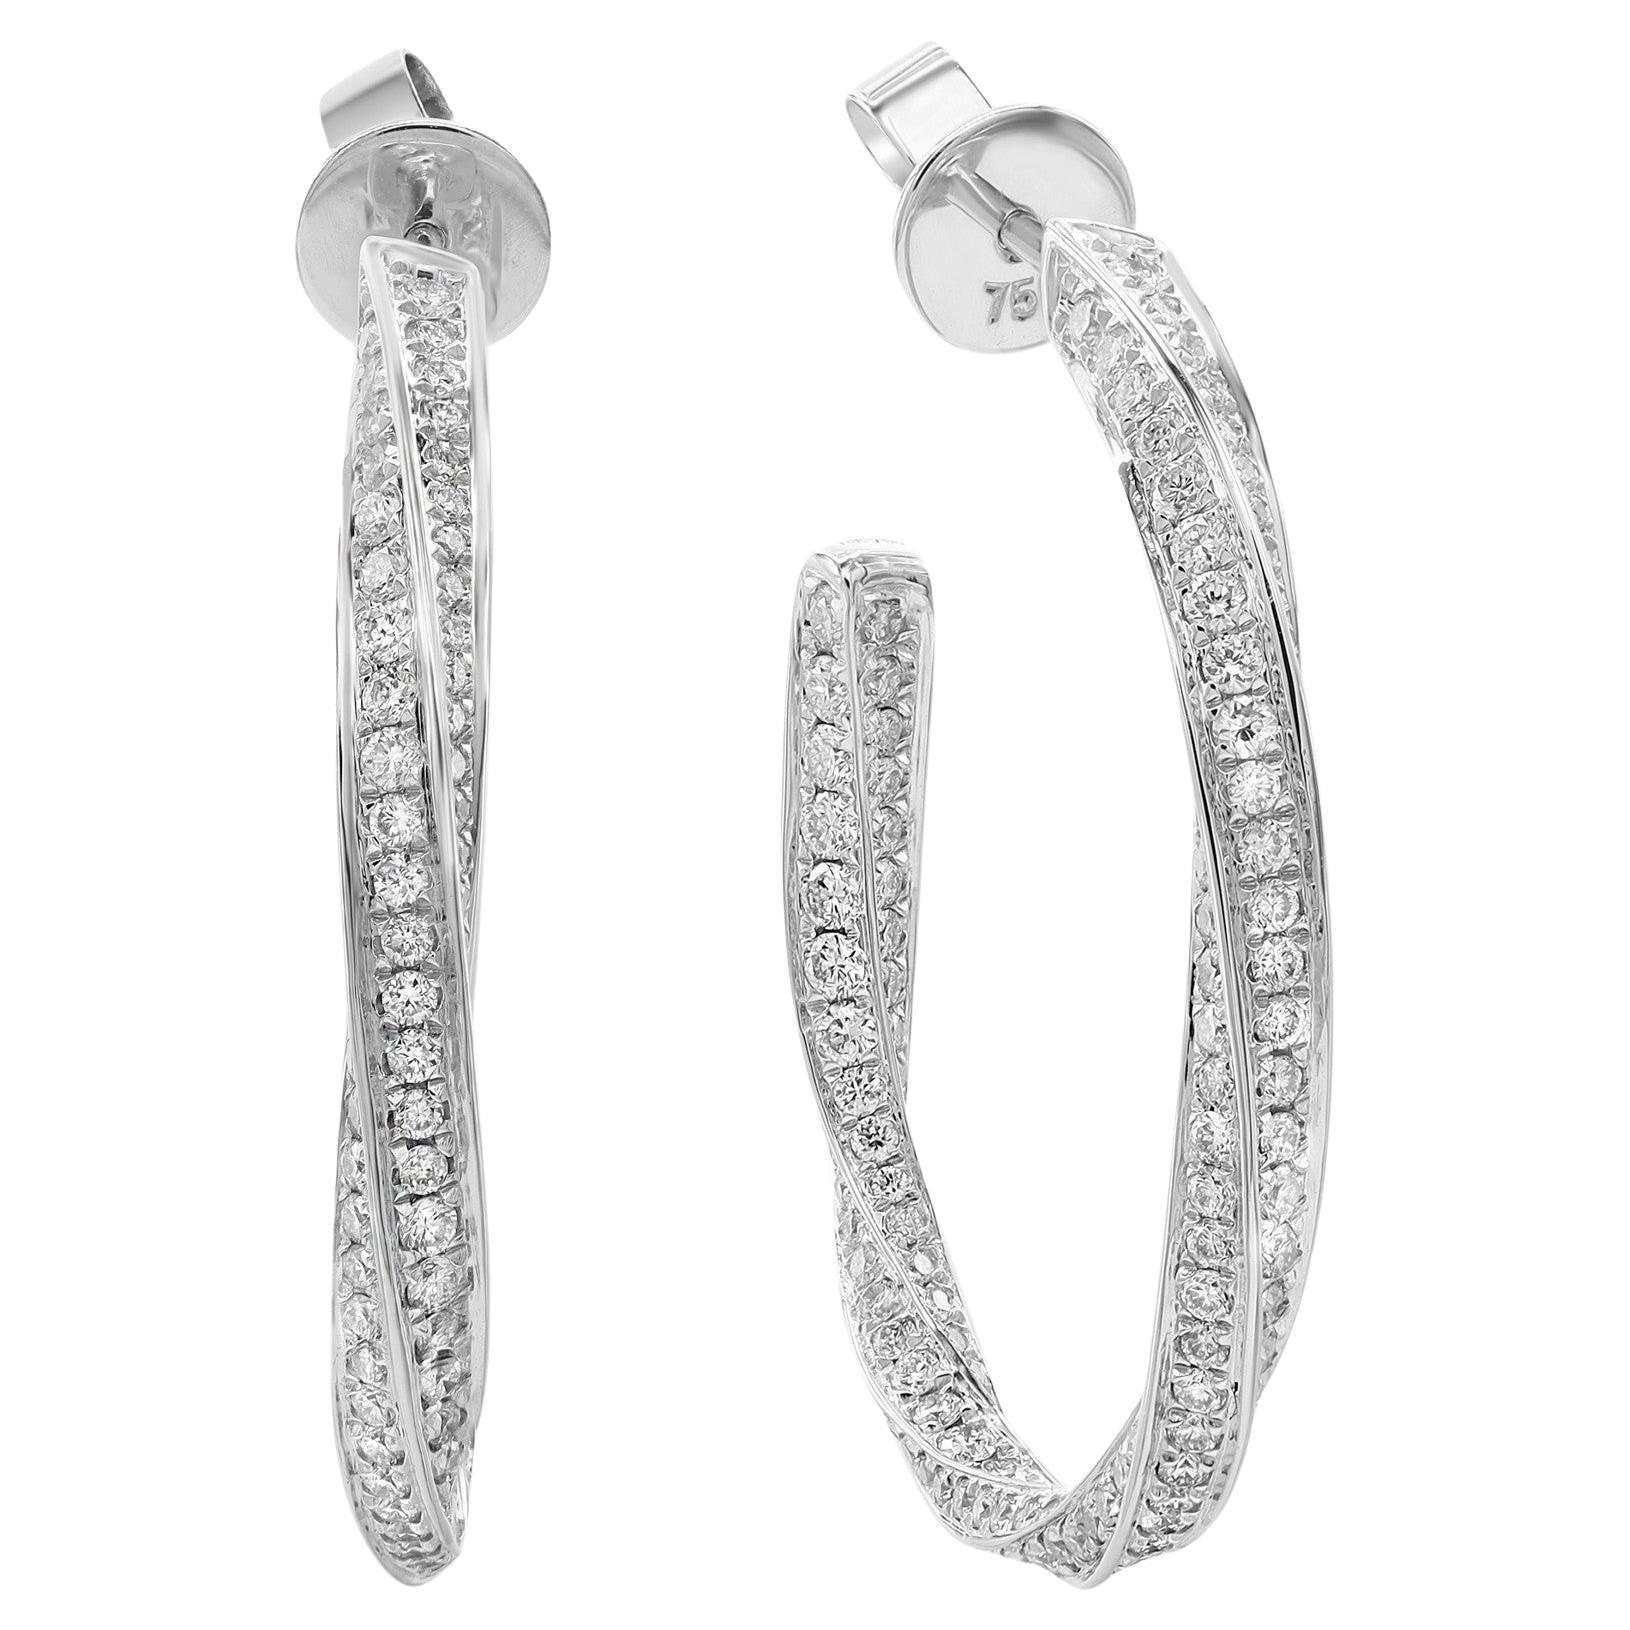 2.02Cttw Pave Set Round Cut Diamond Hoop Earrings 18K White Gold For Sale